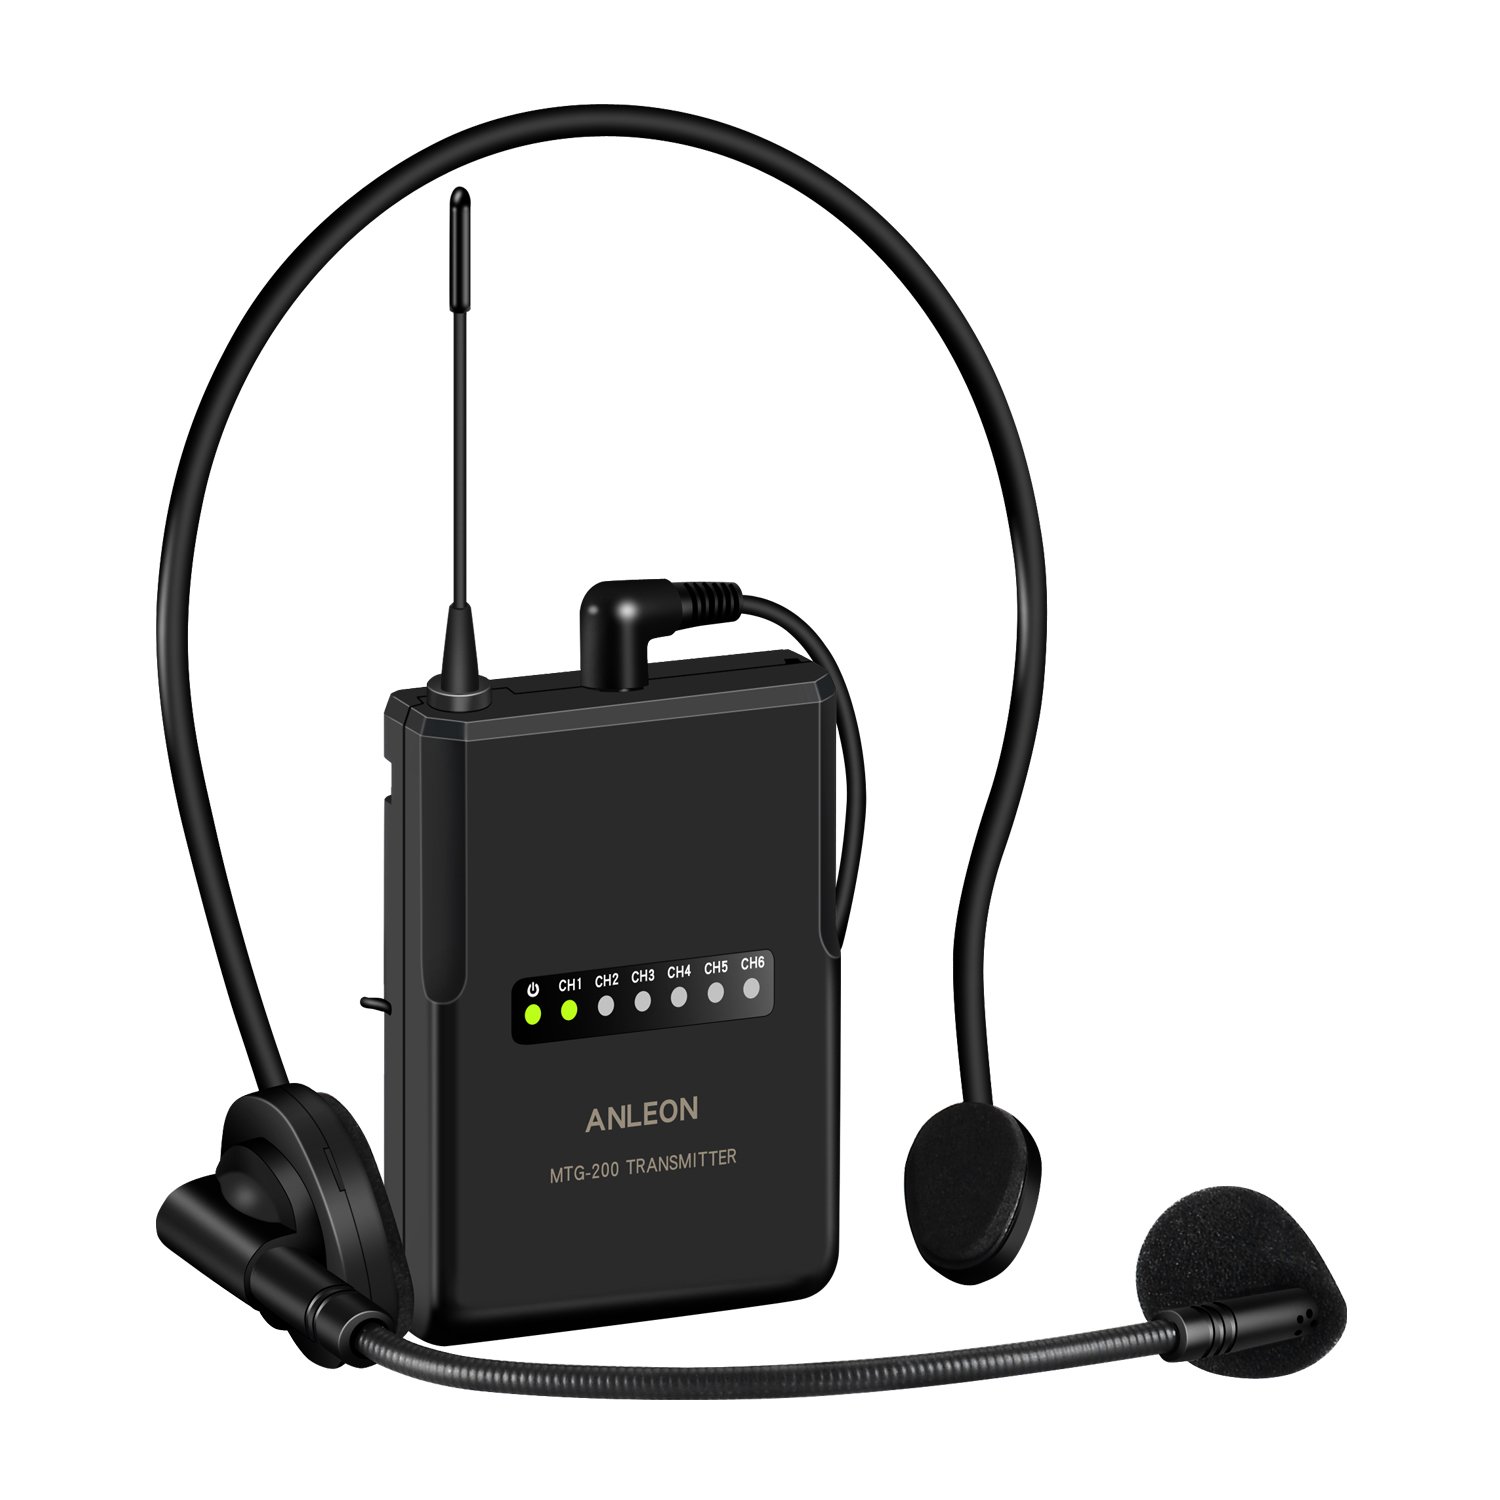 ANLEON MTG-200 wireless tour guide language translation system Translation Headsets for Factory tours,Simultaneous translation,Employee training 915Mhz (1 transmitter 1receiver)